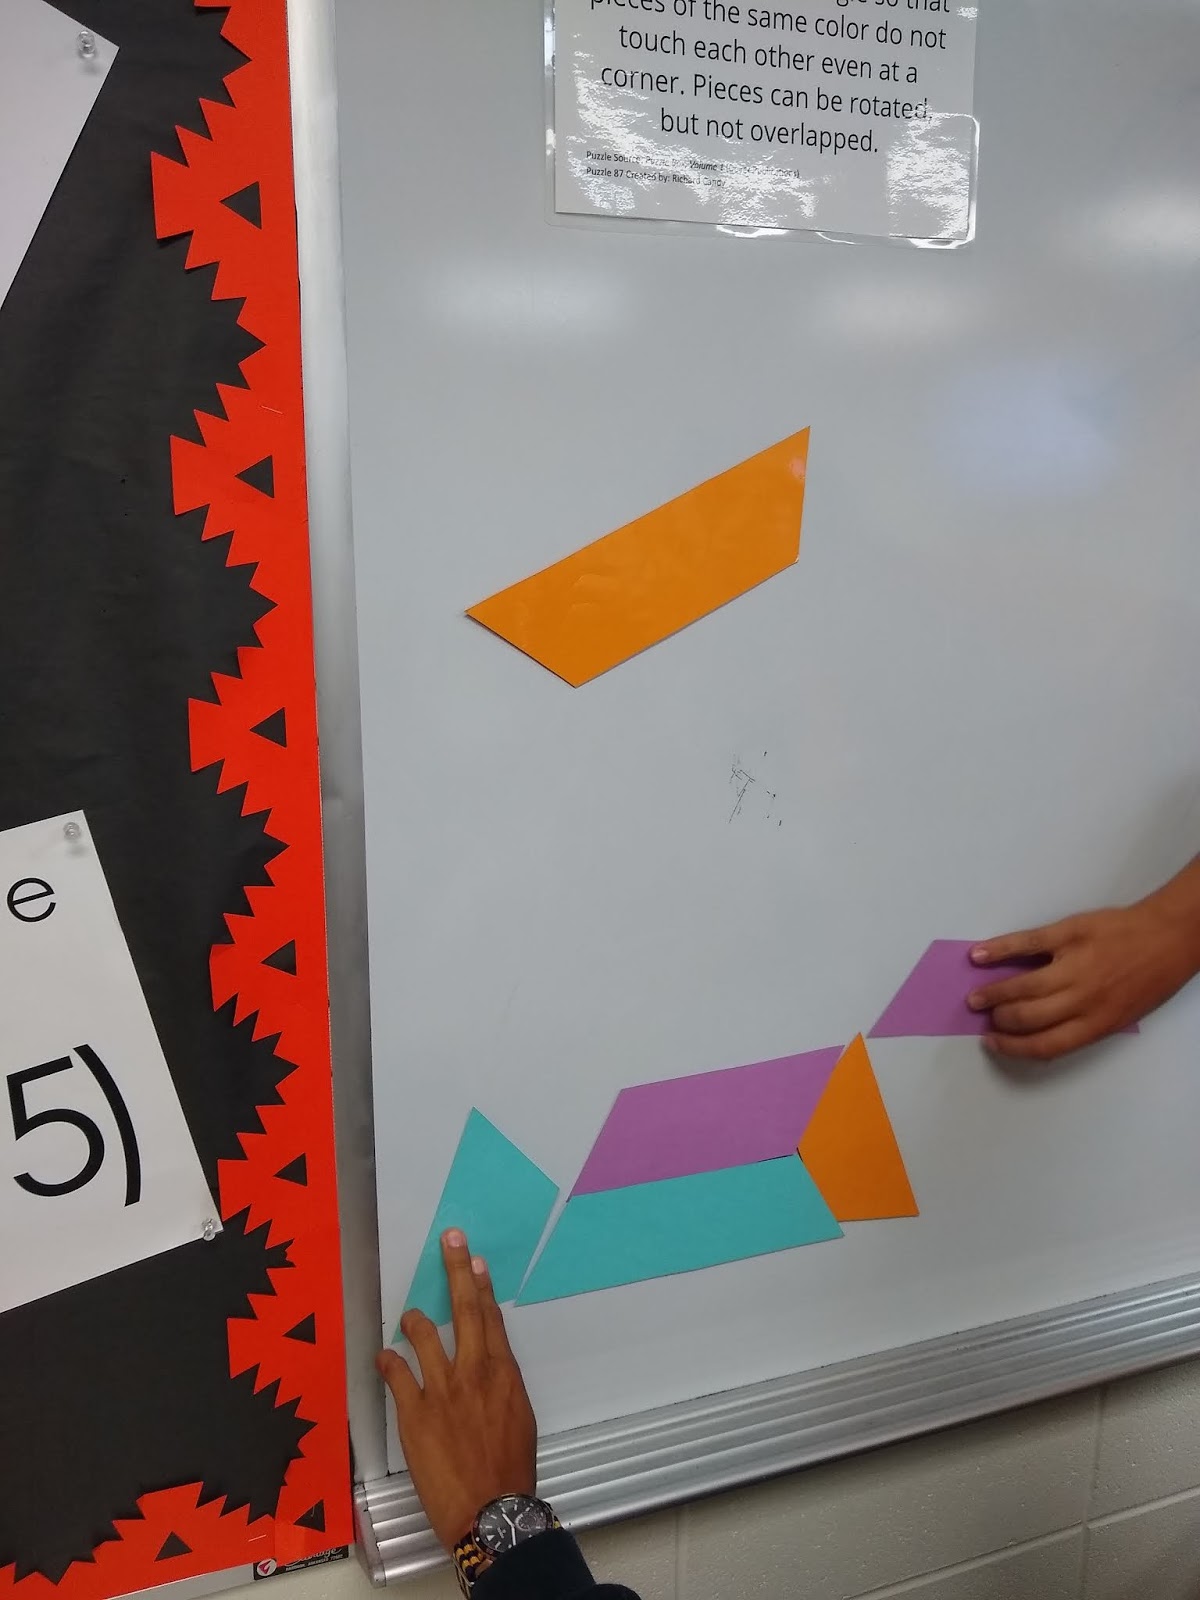 Equilateral Triangle Puzzle